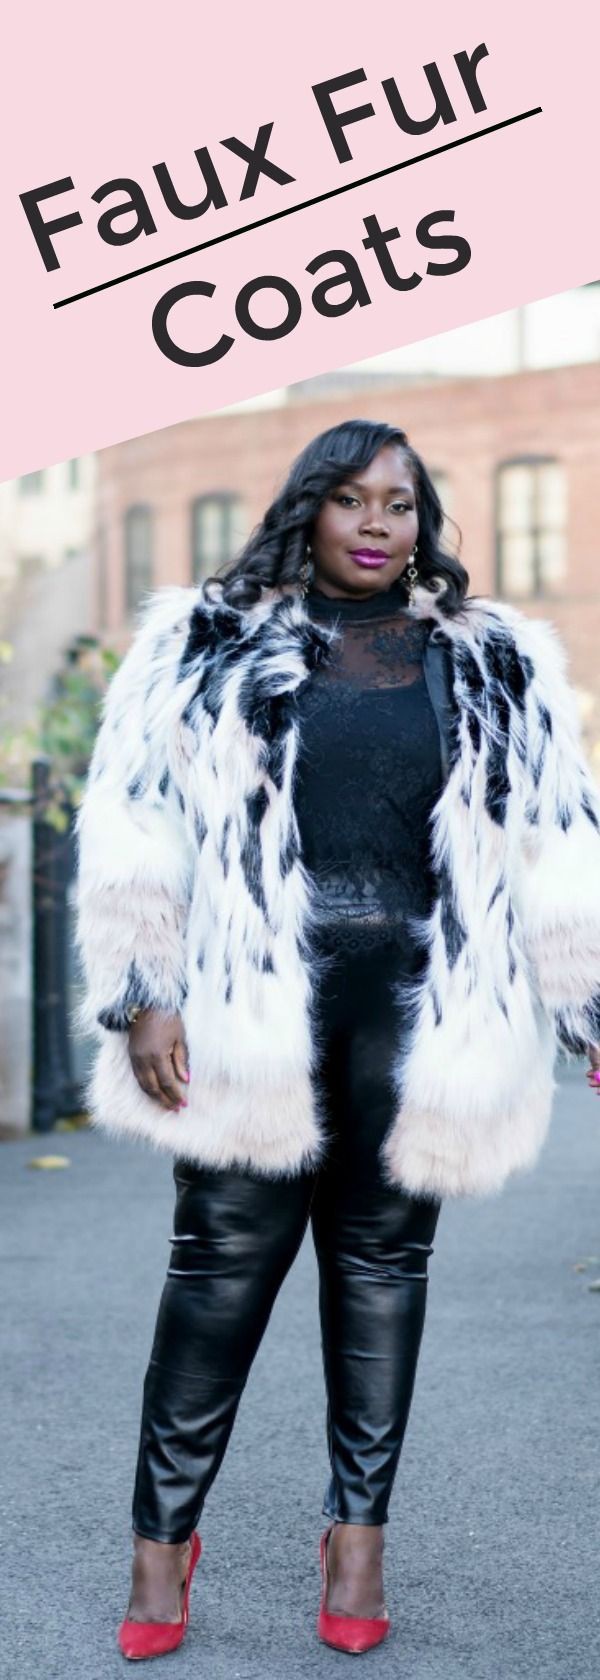 ideas with fur clothing, coat, fur | Plus Size Travel Outfit Ideas | Black hair, Fake fur, Fur clothing